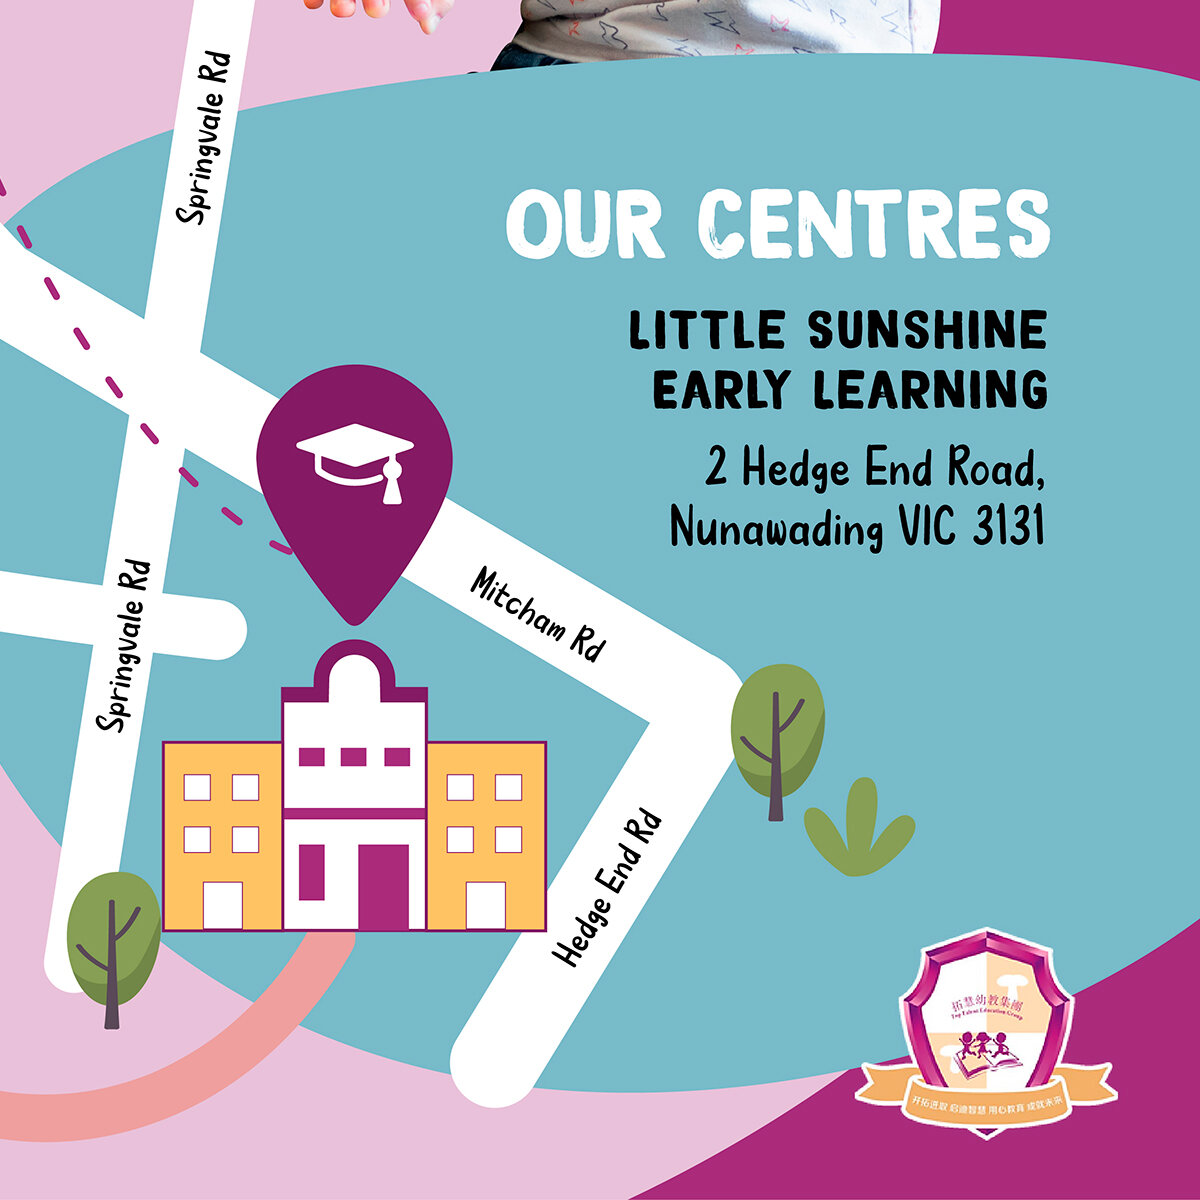 Say hello to Little Sunshine Early Learning &mdash; where curiosity meets purposeful activity catered to multiple aged groups from 6 weeks up to 5 years old!

#TopTalentEducation #EarlyLearningCentre #Childcare #Doncaster #LittleSunshine #MelbourneNu